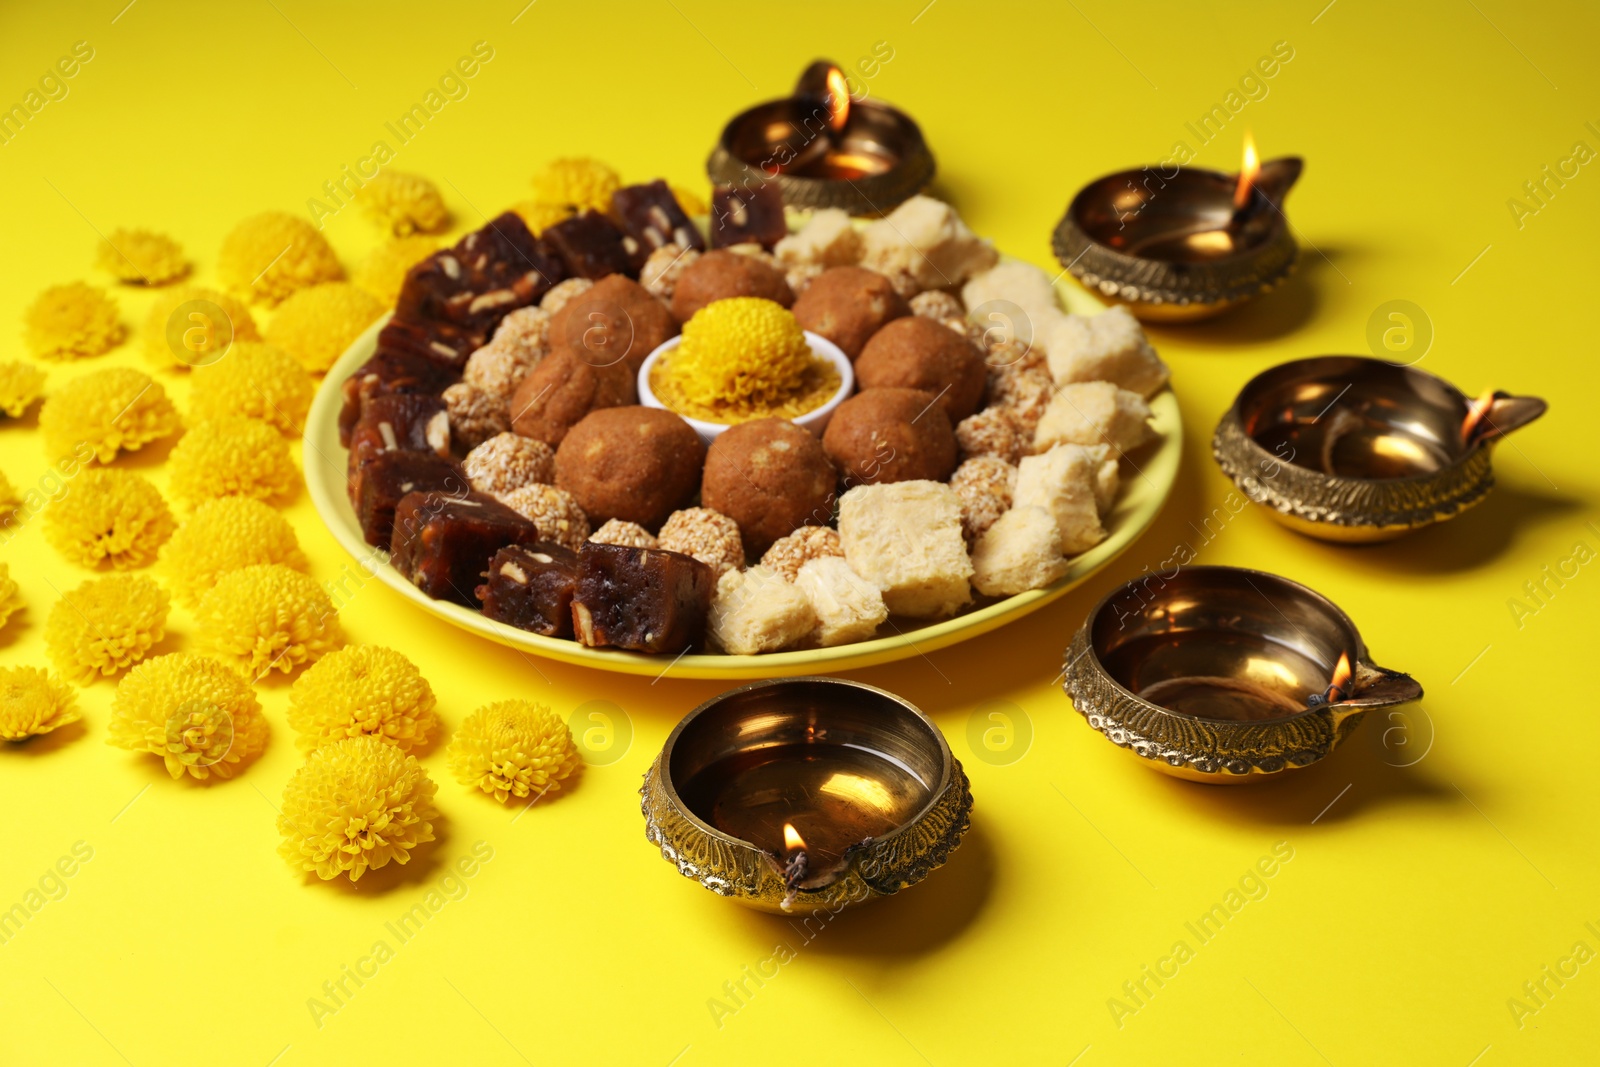 Photo of Happy Diwali. Composition with diya lamps, chrysanthemum flowers and delicious Indian sweets on yellow table